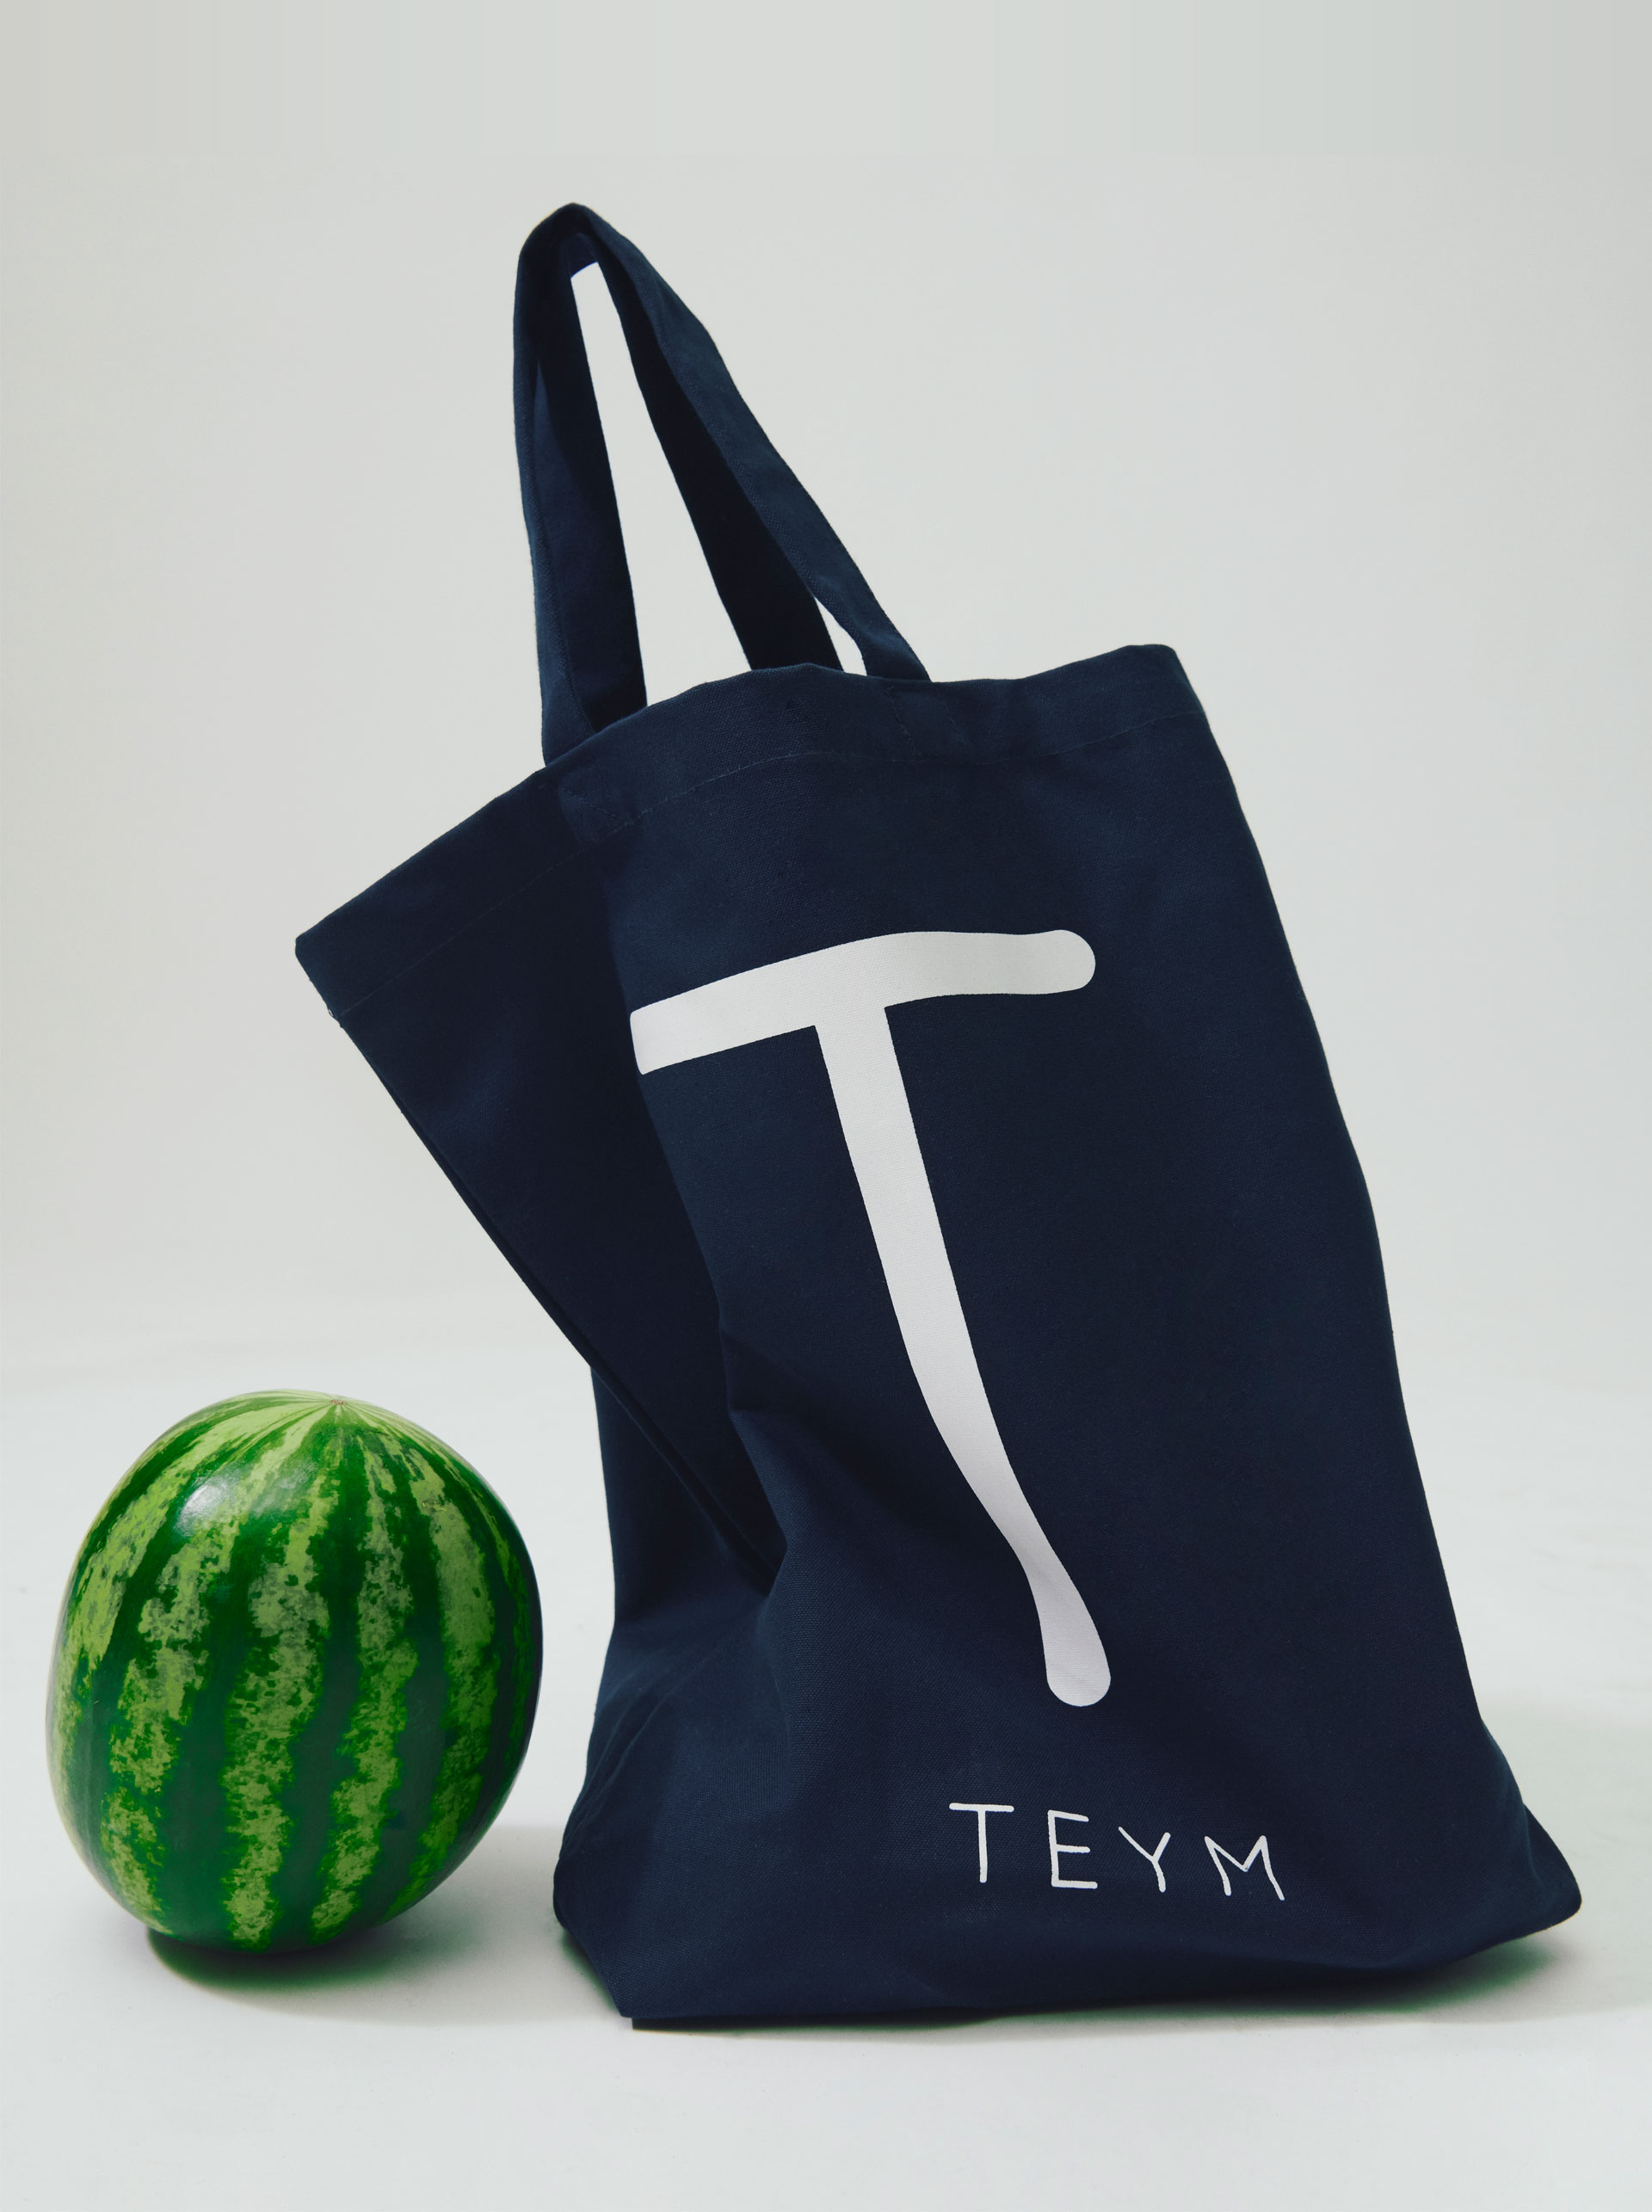 Teym - The Canvas Tote - 2